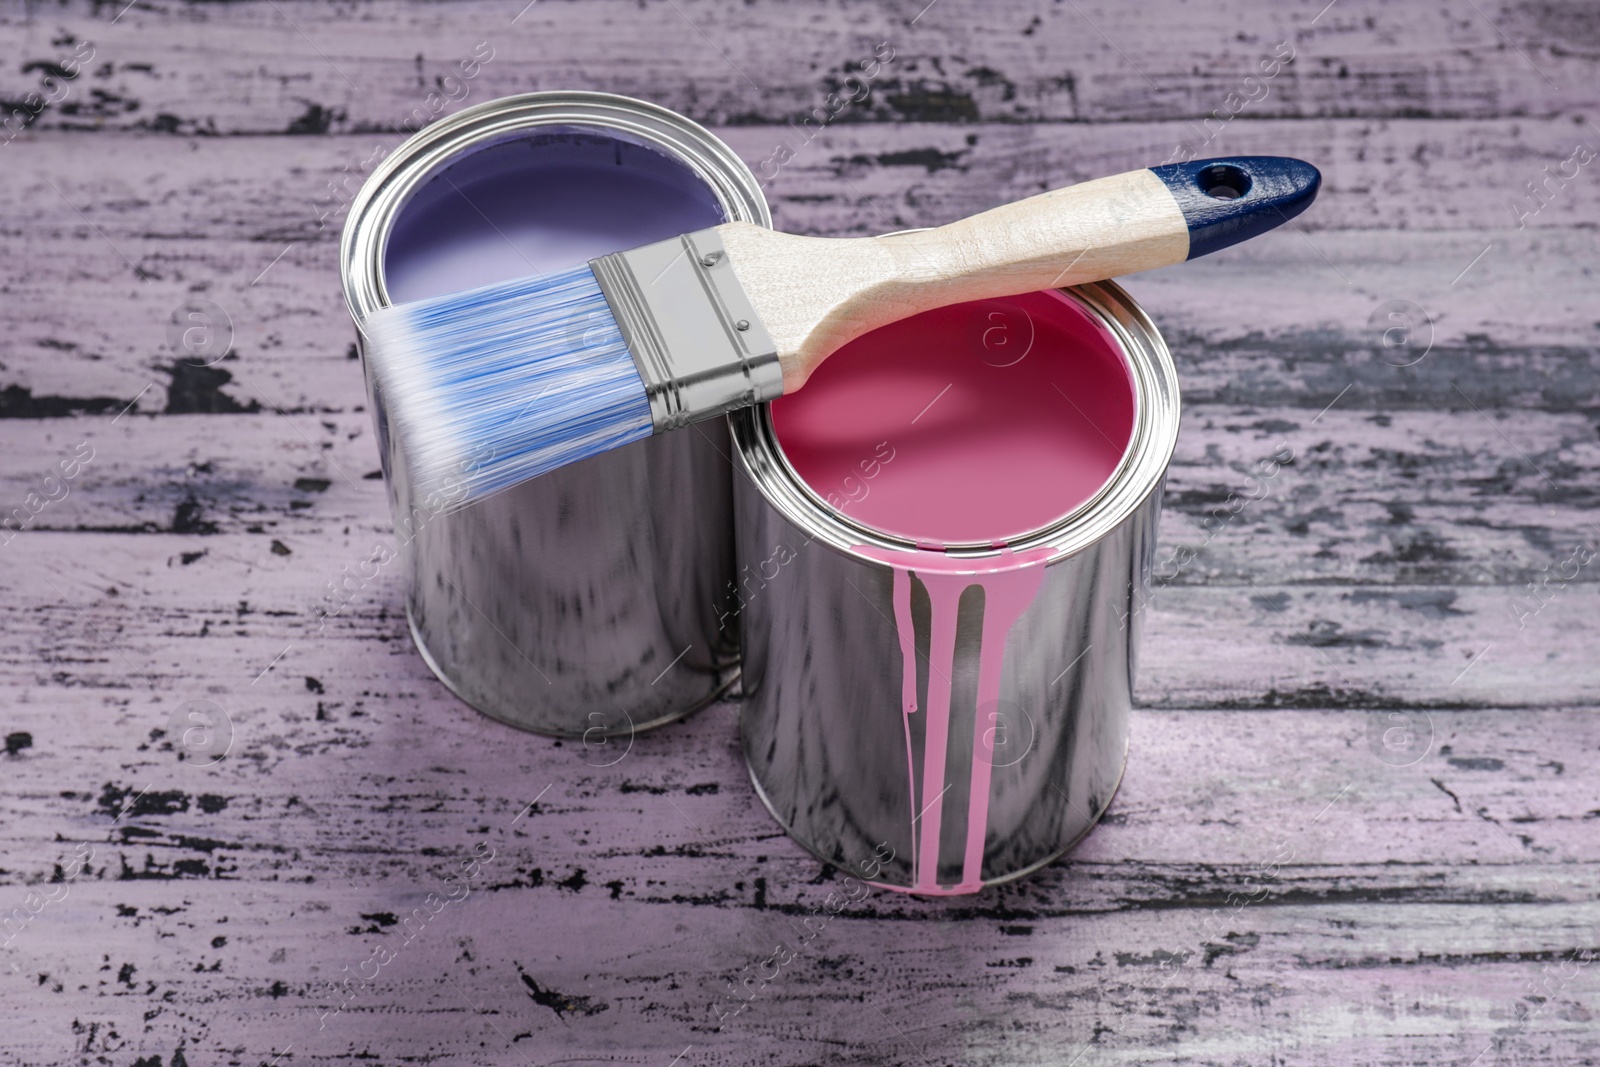 Photo of Cans of pink and lilac paints with brush on rustic wooden table